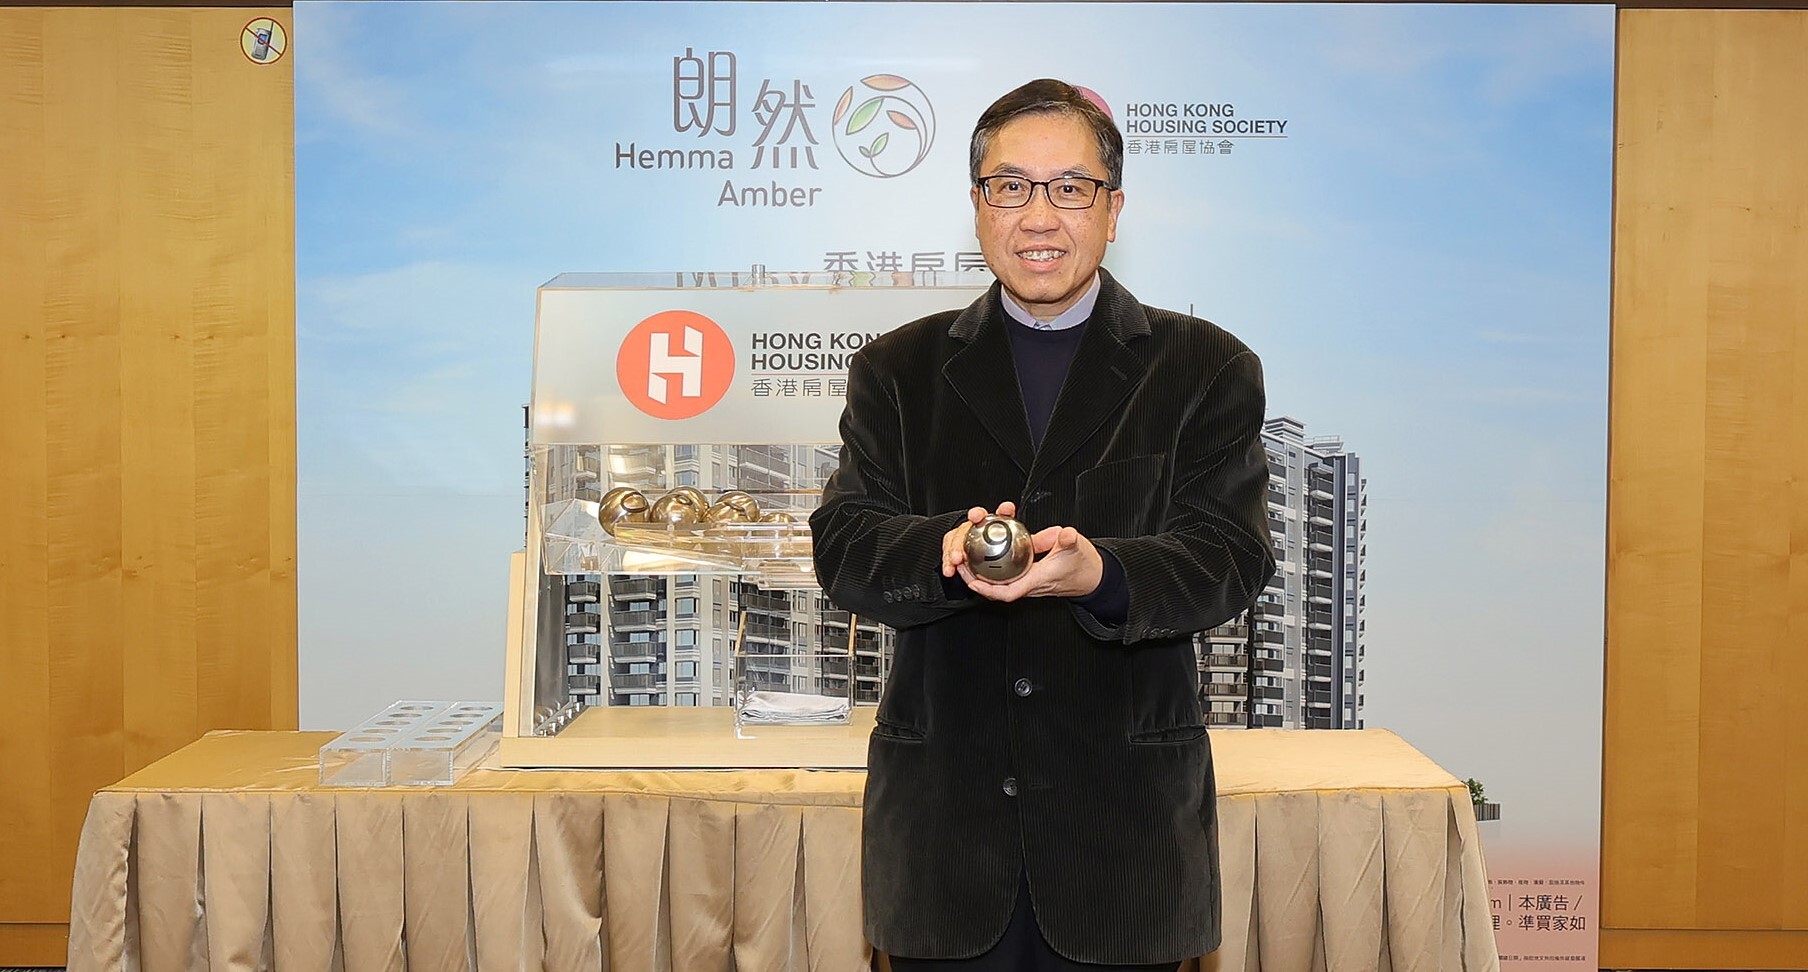 HKHS Acting Director (Development and Marketing) Oliver Law conducted balloting for the Subsidised Sale Flats project “Hemma Amber”.
